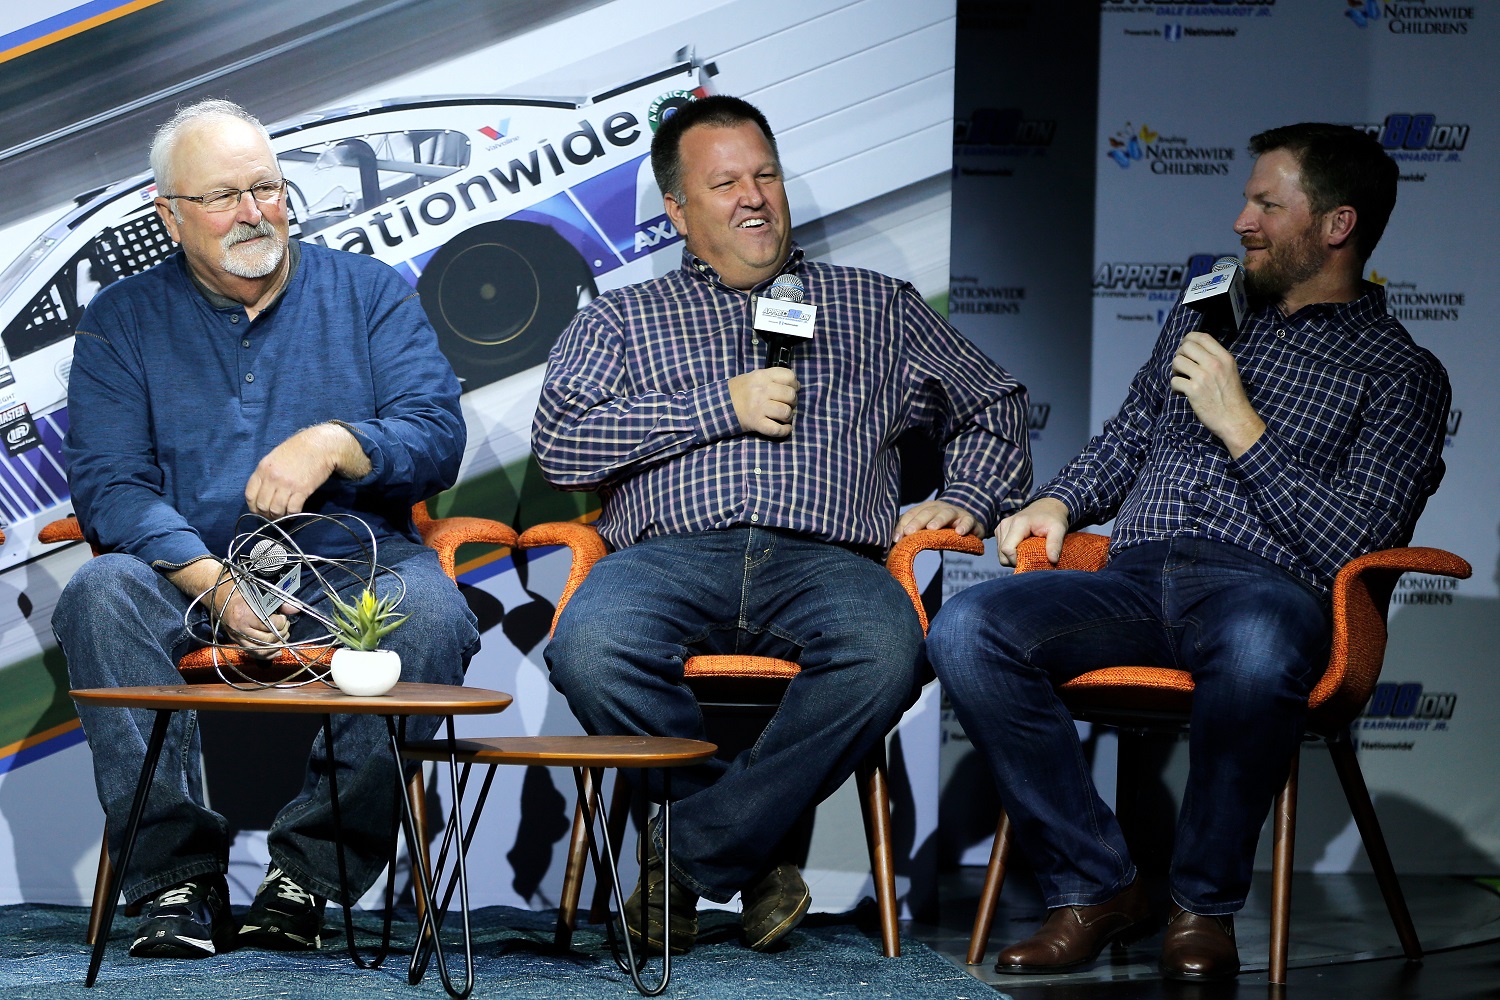 Tony Eury Sr., Tony Eury Jr., and Dale Earnhardt Jr. talk on stage during 'Appreci88ion, An Evening With Dale Earnhardt Jr.' at The Cosmopolitan of Las Vegas on Nov. 28, 2017 in Las Vegas, Nevada.  | Jonathan Ferrey/Getty Images